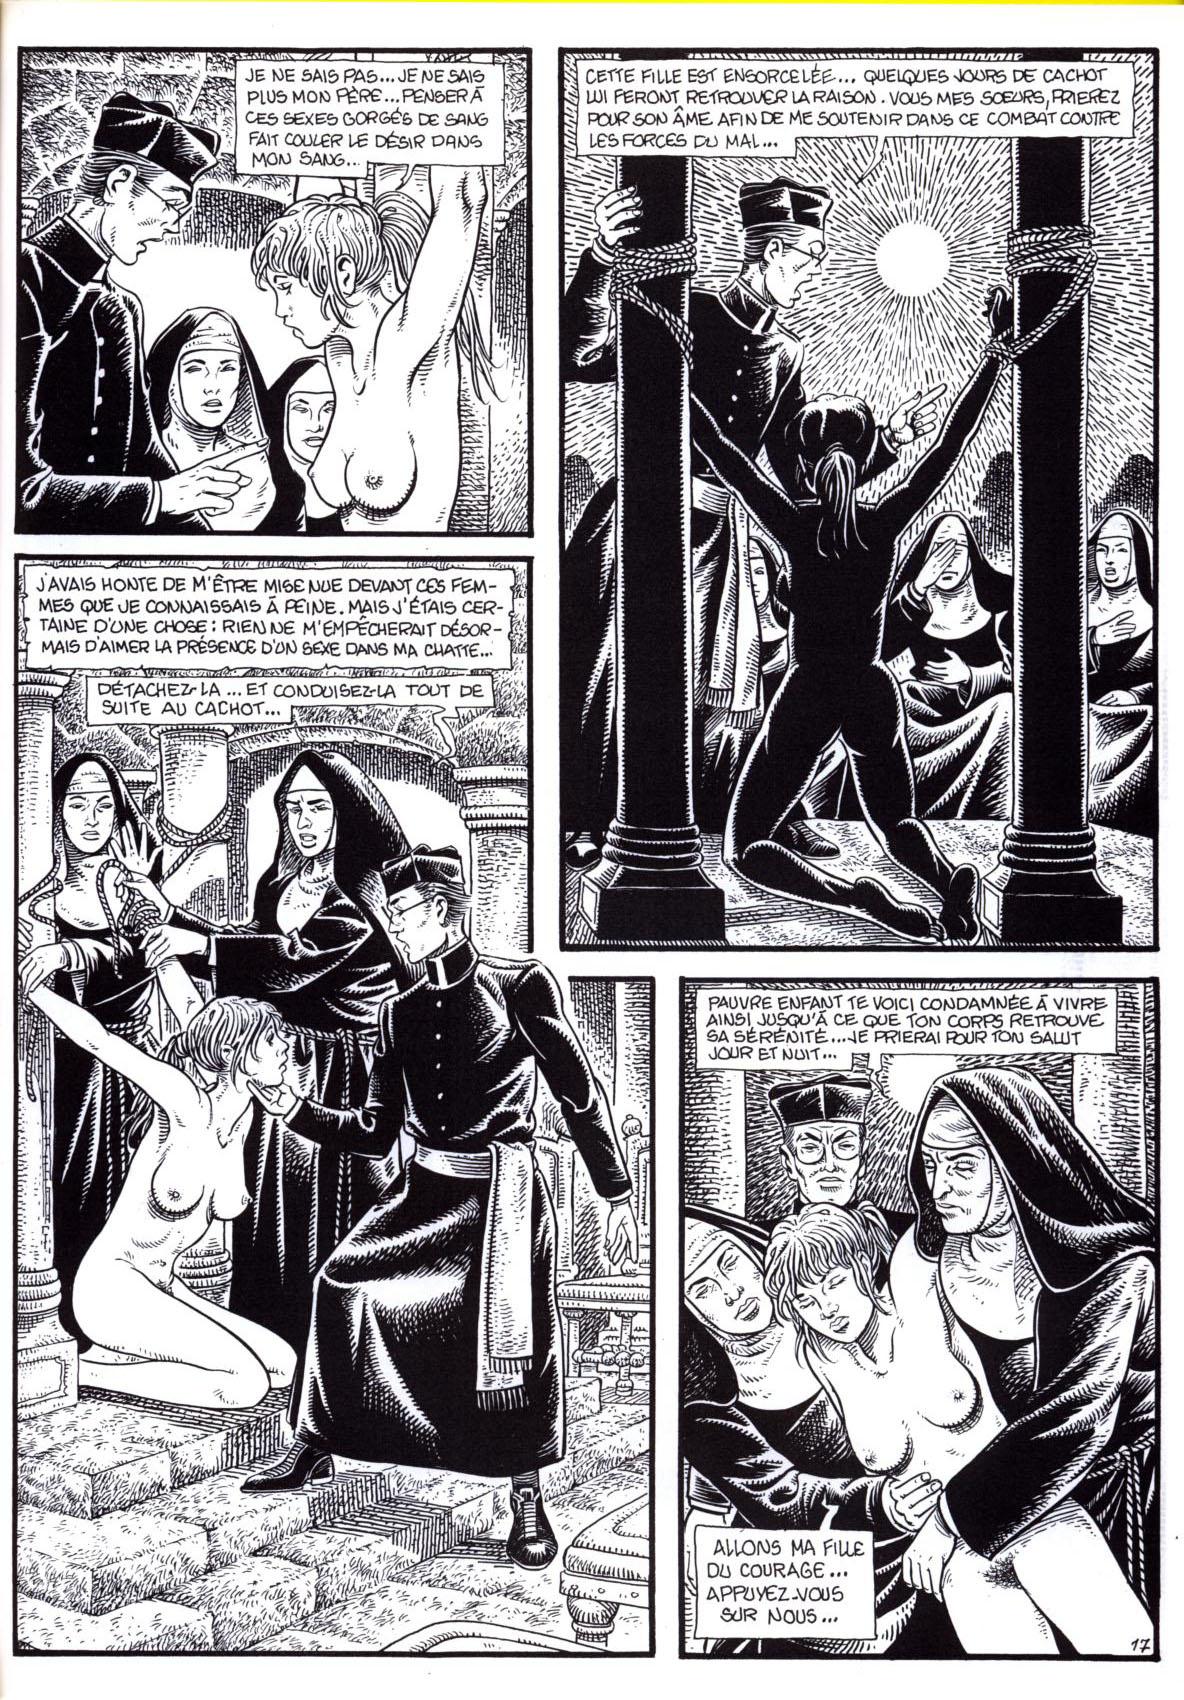 The Mary Magdalene Boarding School - Volume 3 numero d'image 19